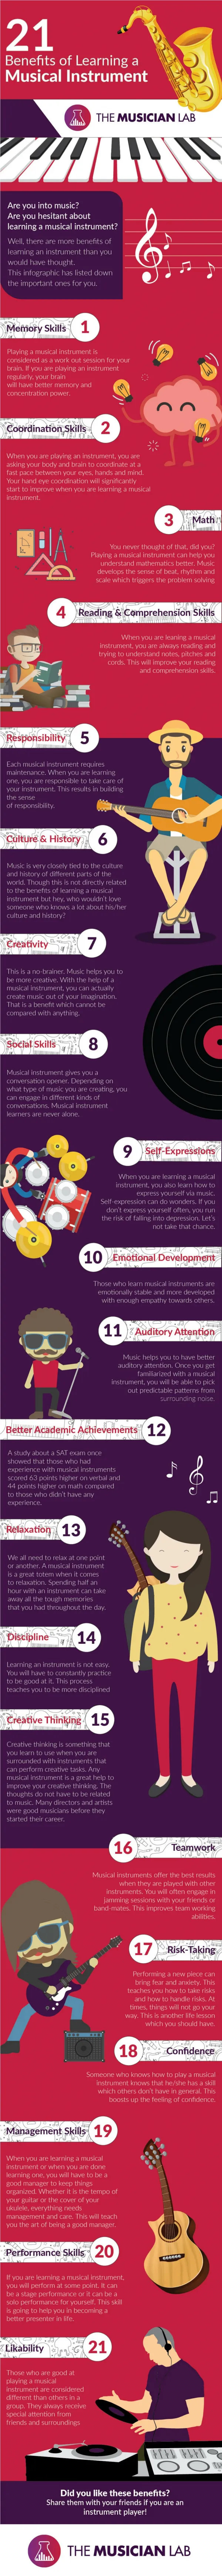 21 BENEFITS OF LEARNING A MUSICAL INSTRUMENT